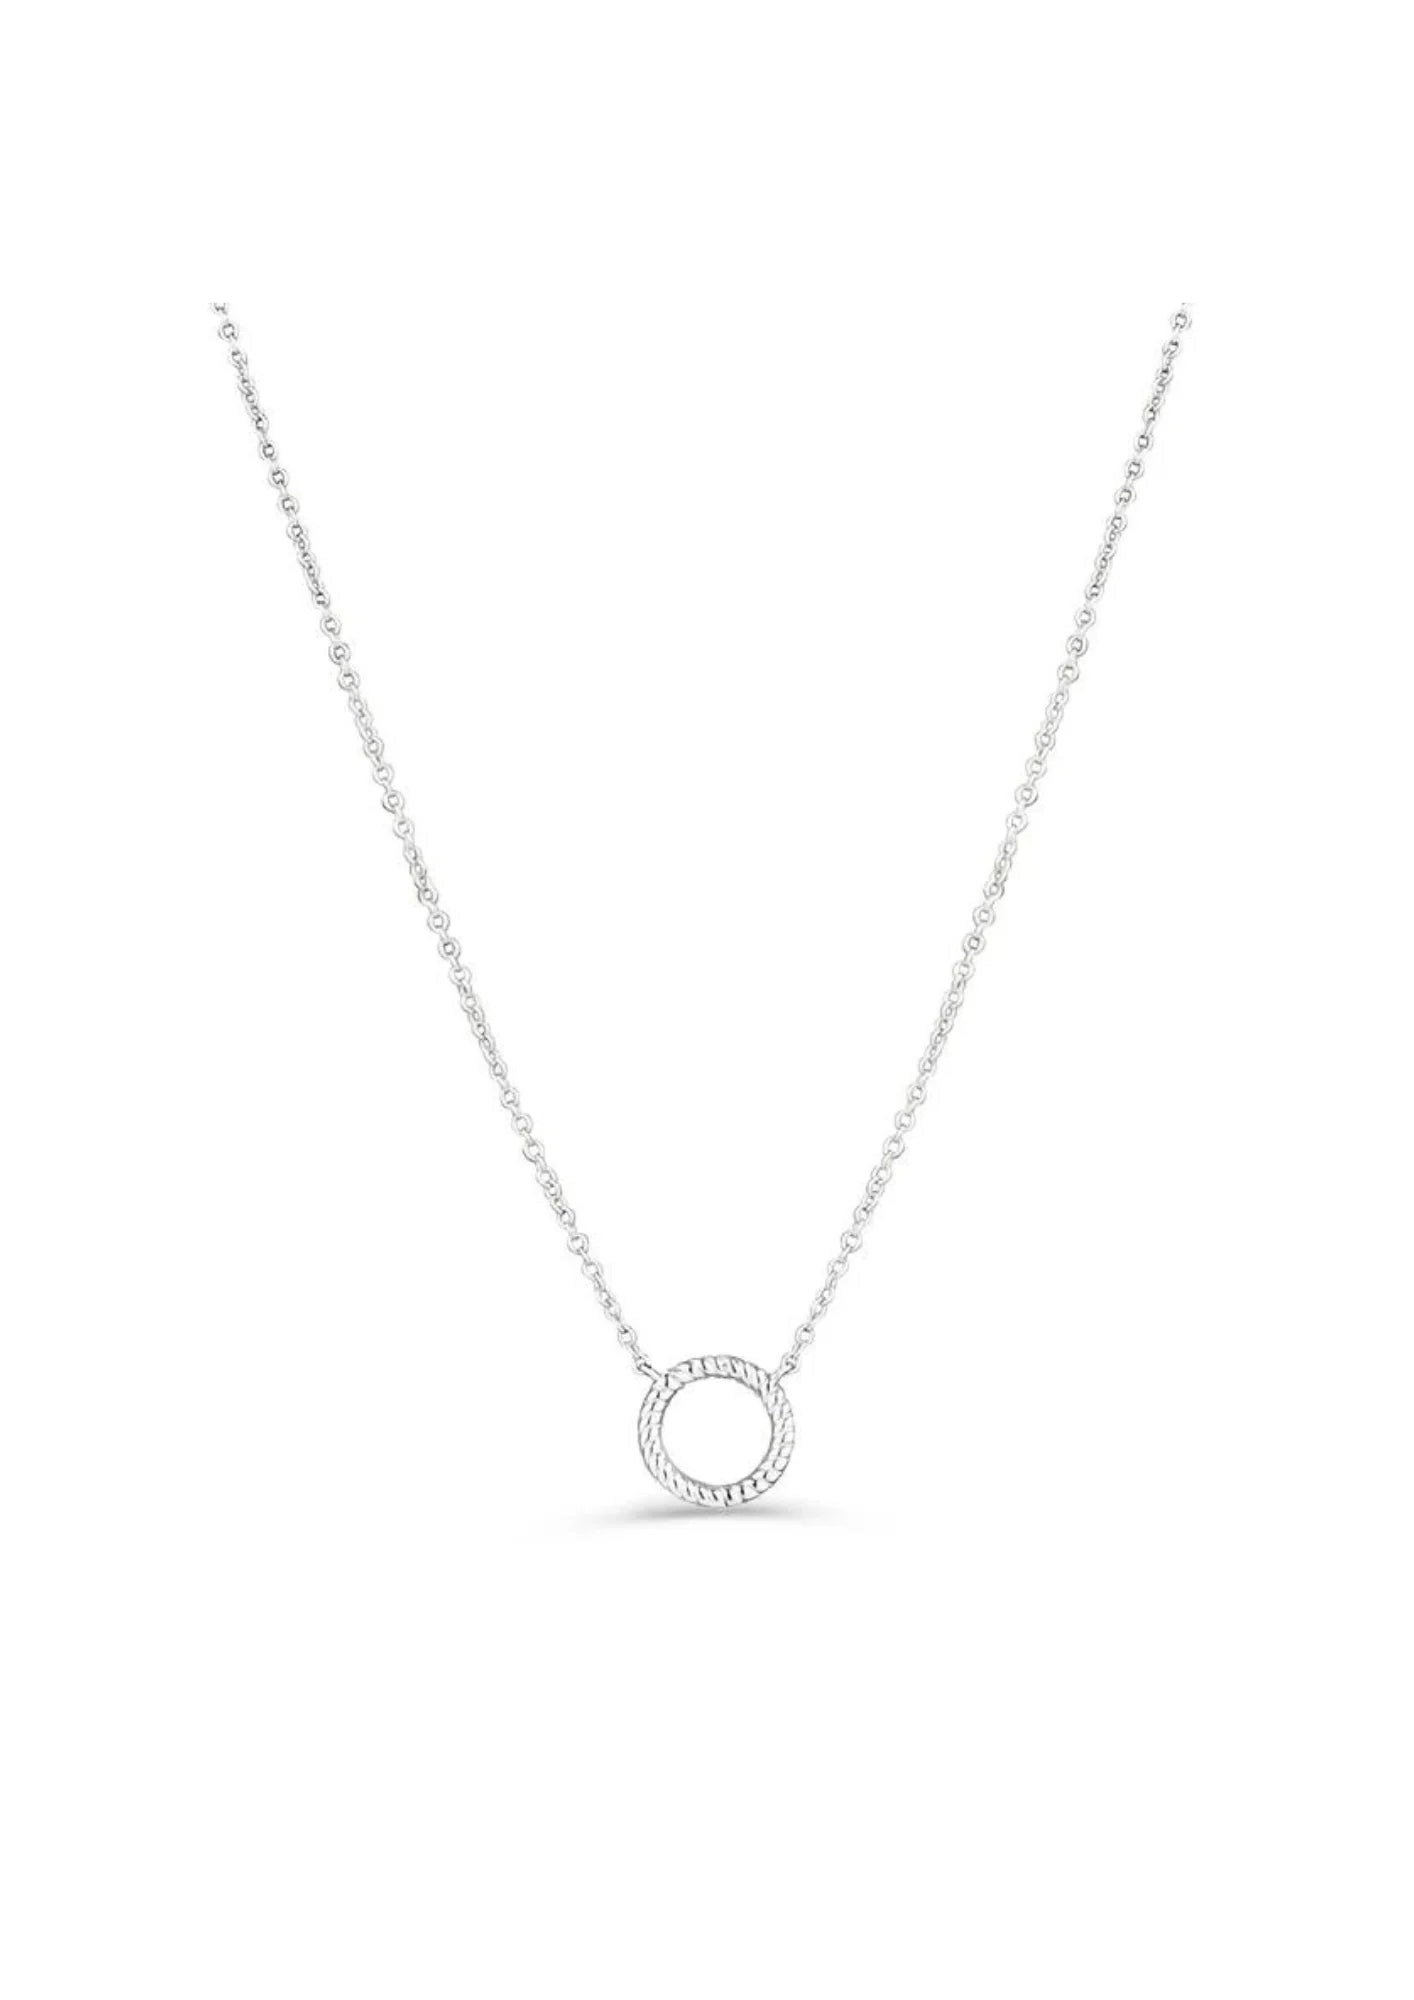 SILVER ROUND NECKLACE